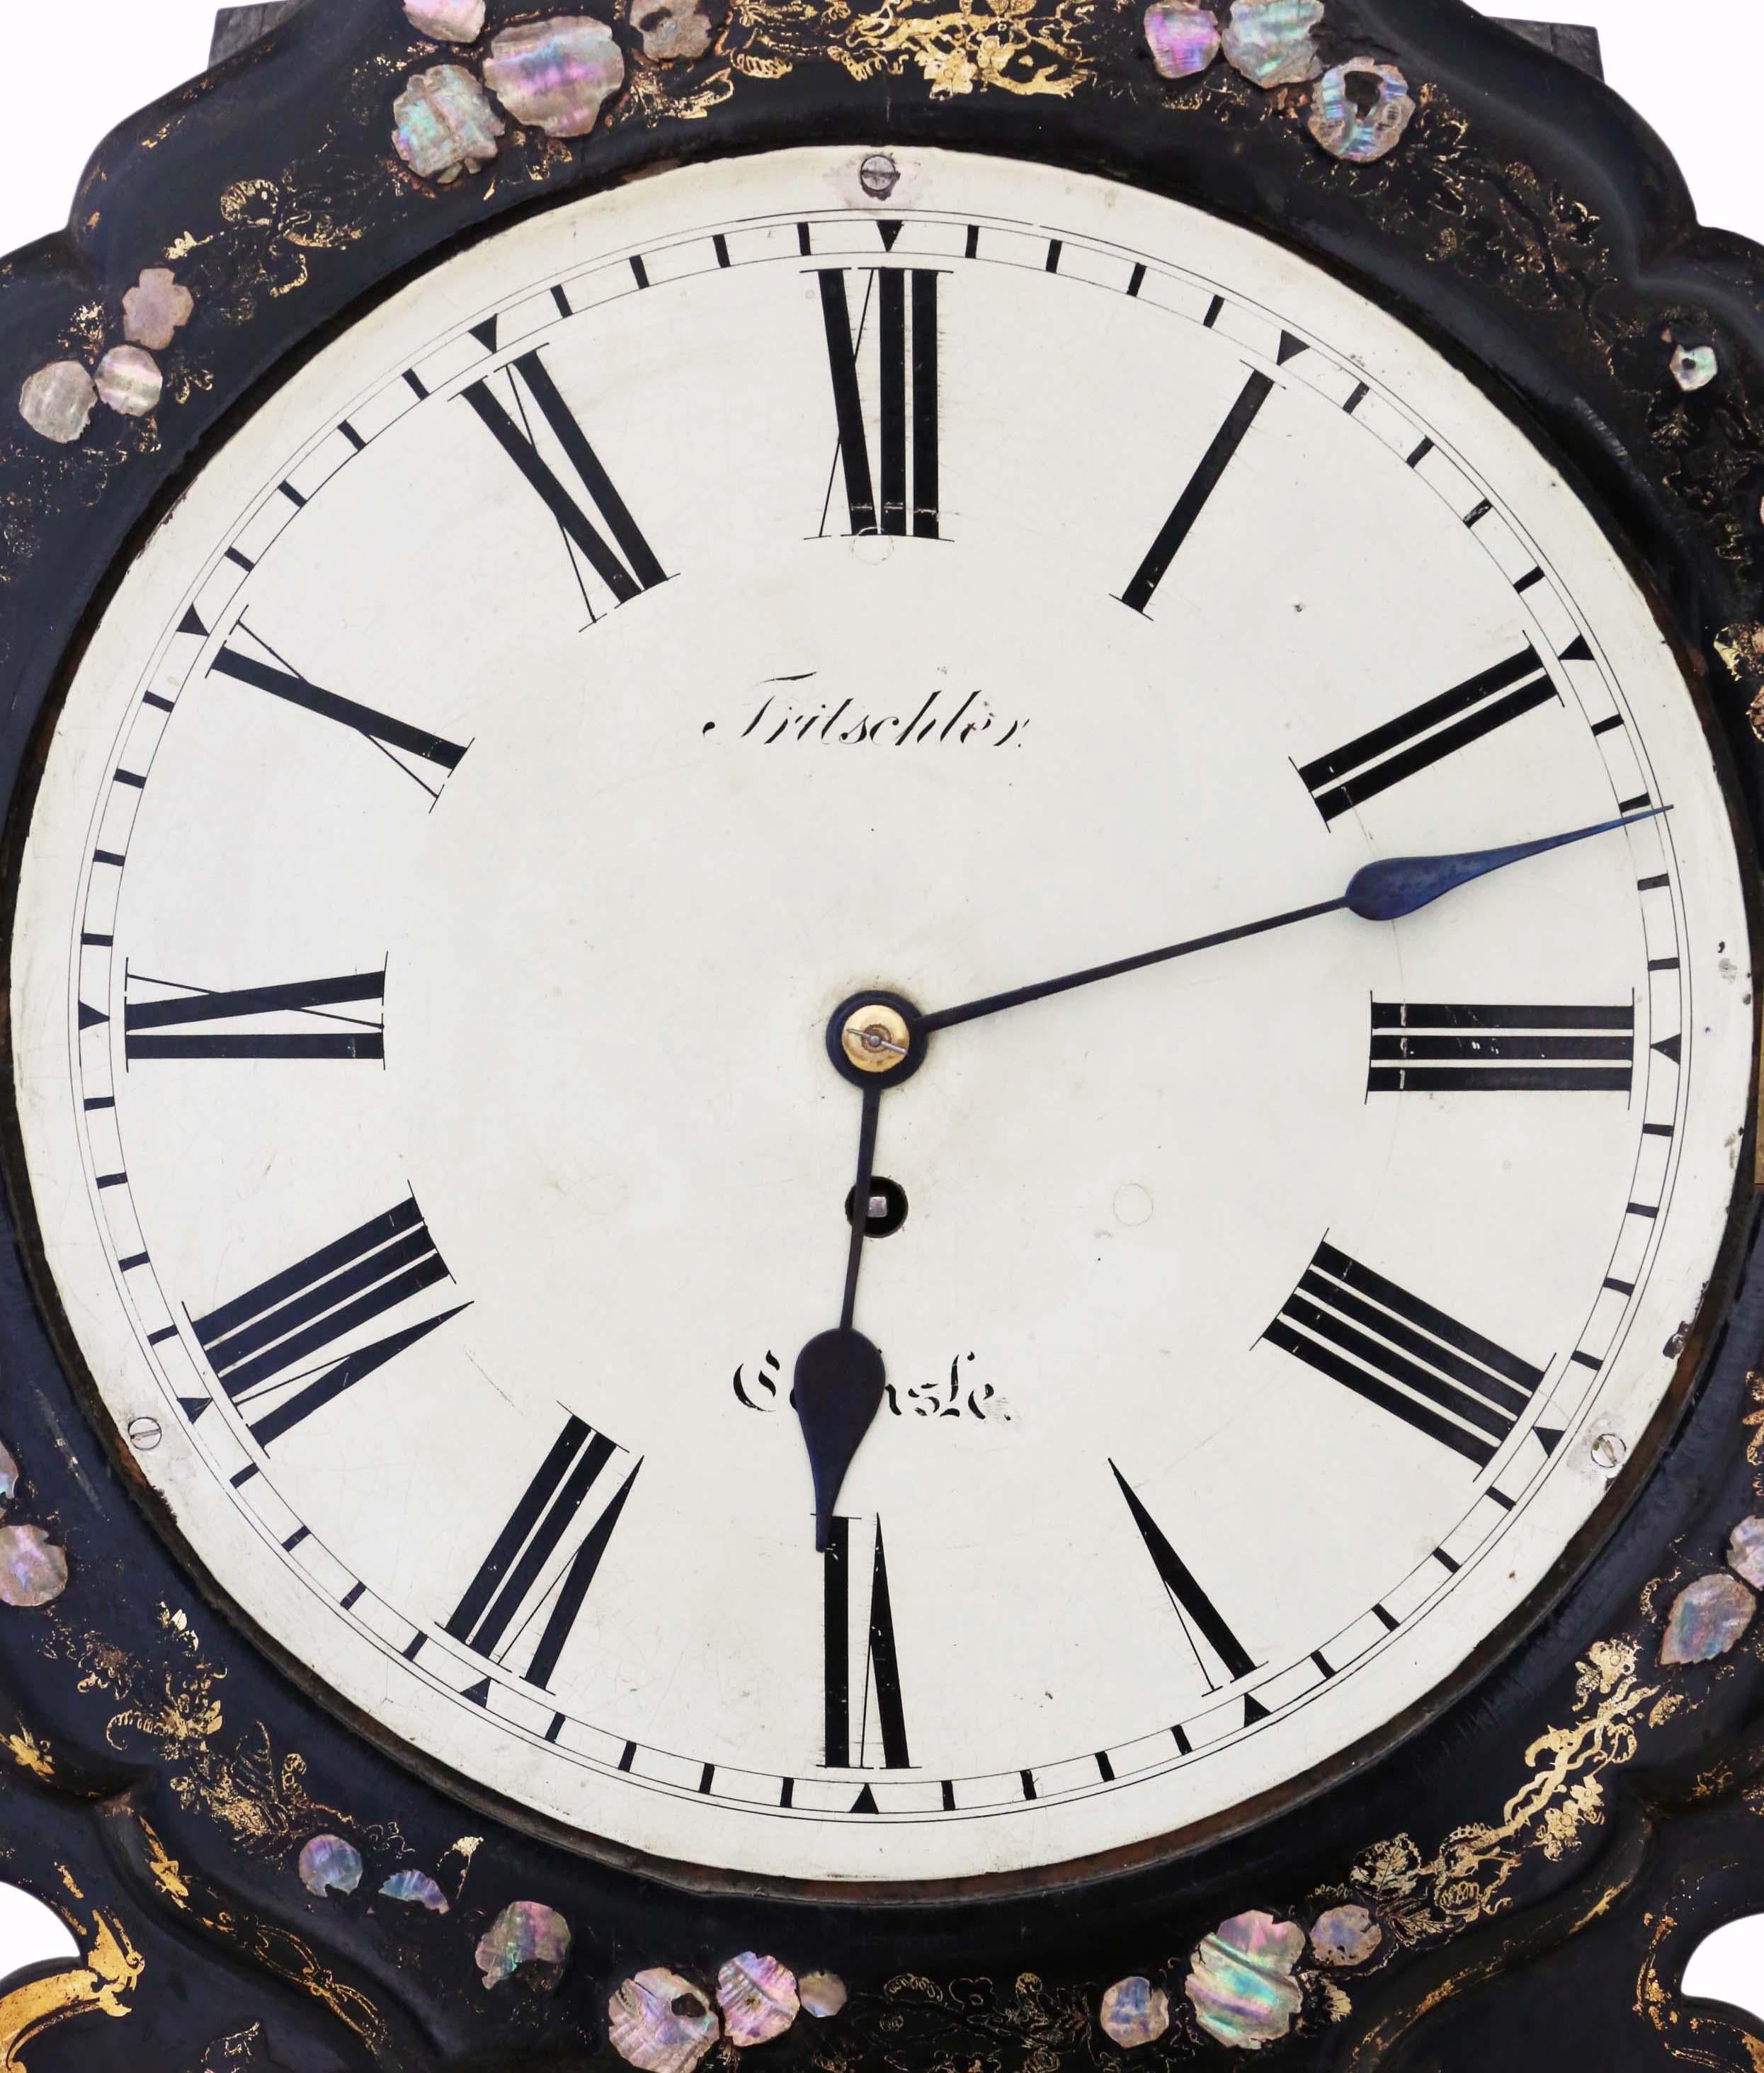 Antique and rare Victorian wall clock crafted from mother of pearl inlaid papier-mâché, featuring a single fusee mechanism. Exceptional in quality, it is challenging to find another of similar caliber.

This decorative piece showcases a black